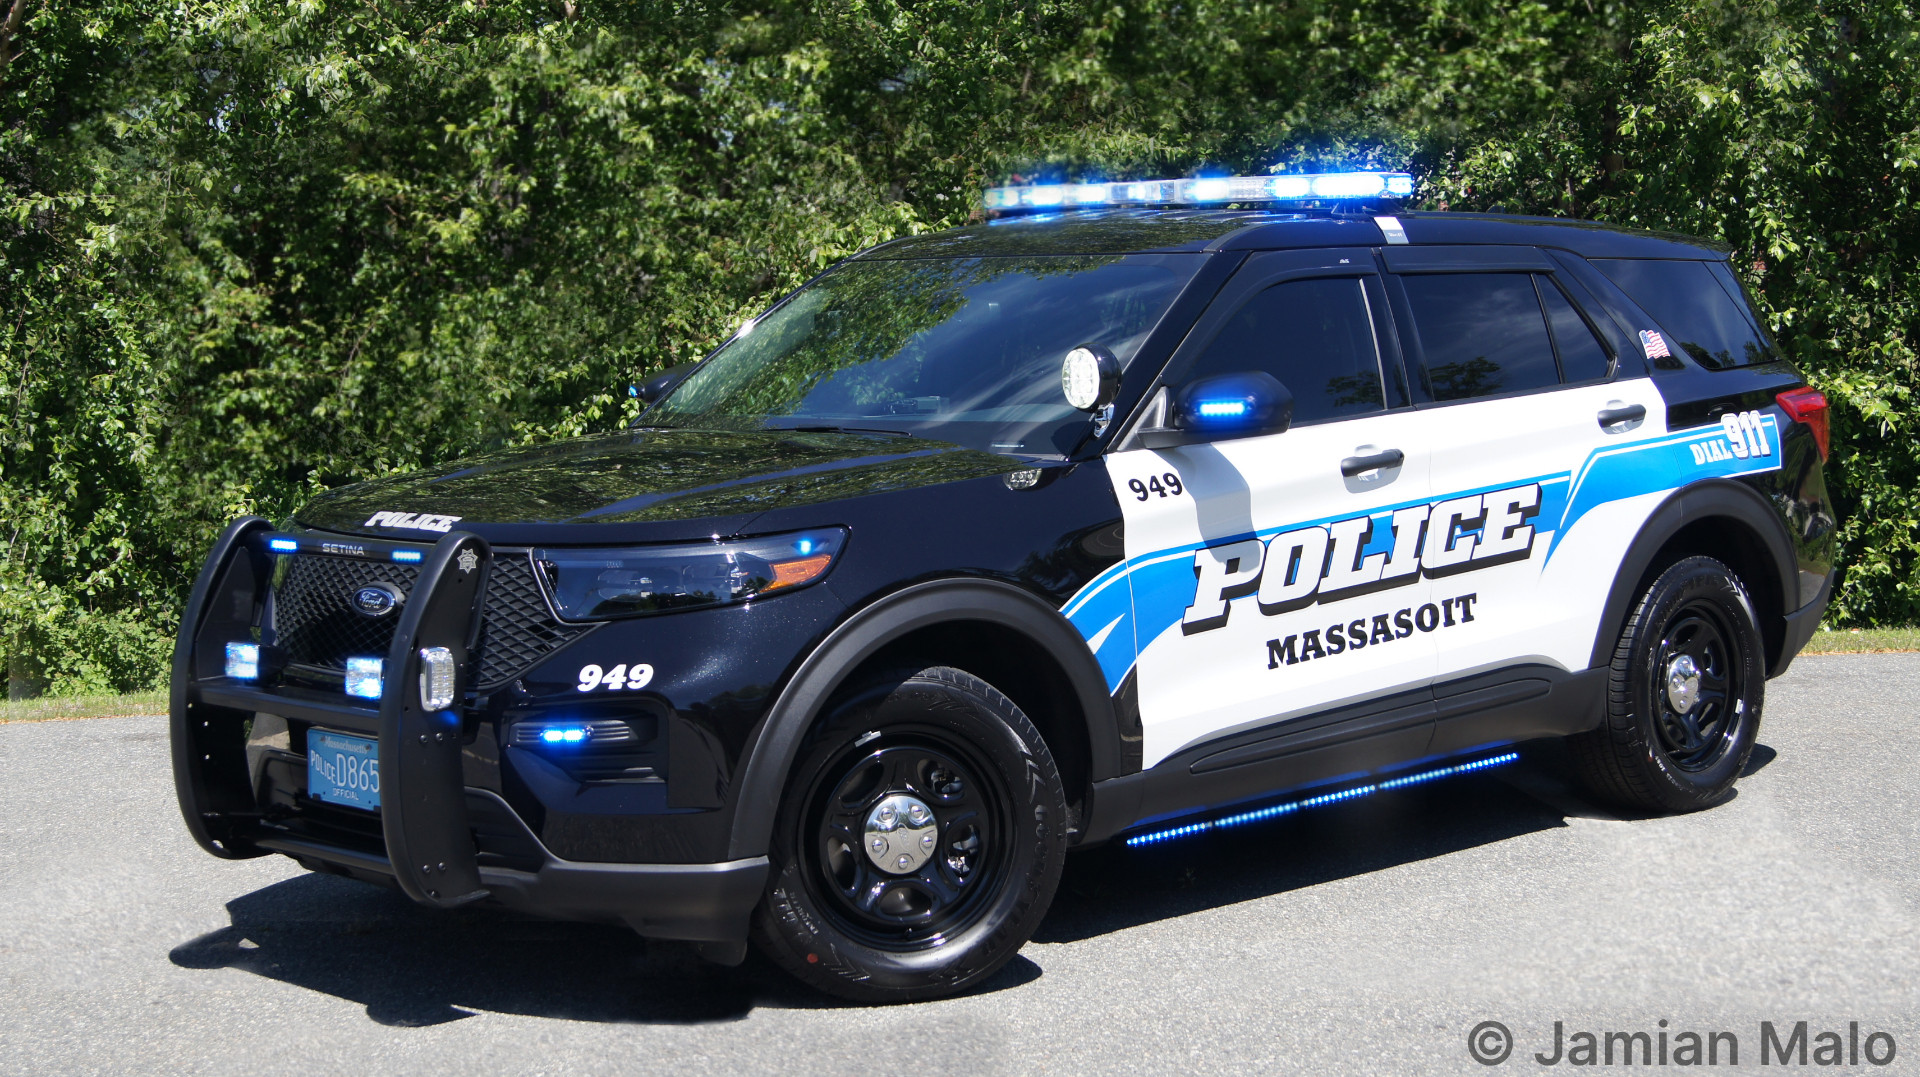 A photo  of Massasoit Community College Police
            Cruiser 949, a 2020 Ford Police Interceptor Utility             taken by Jamian Malo